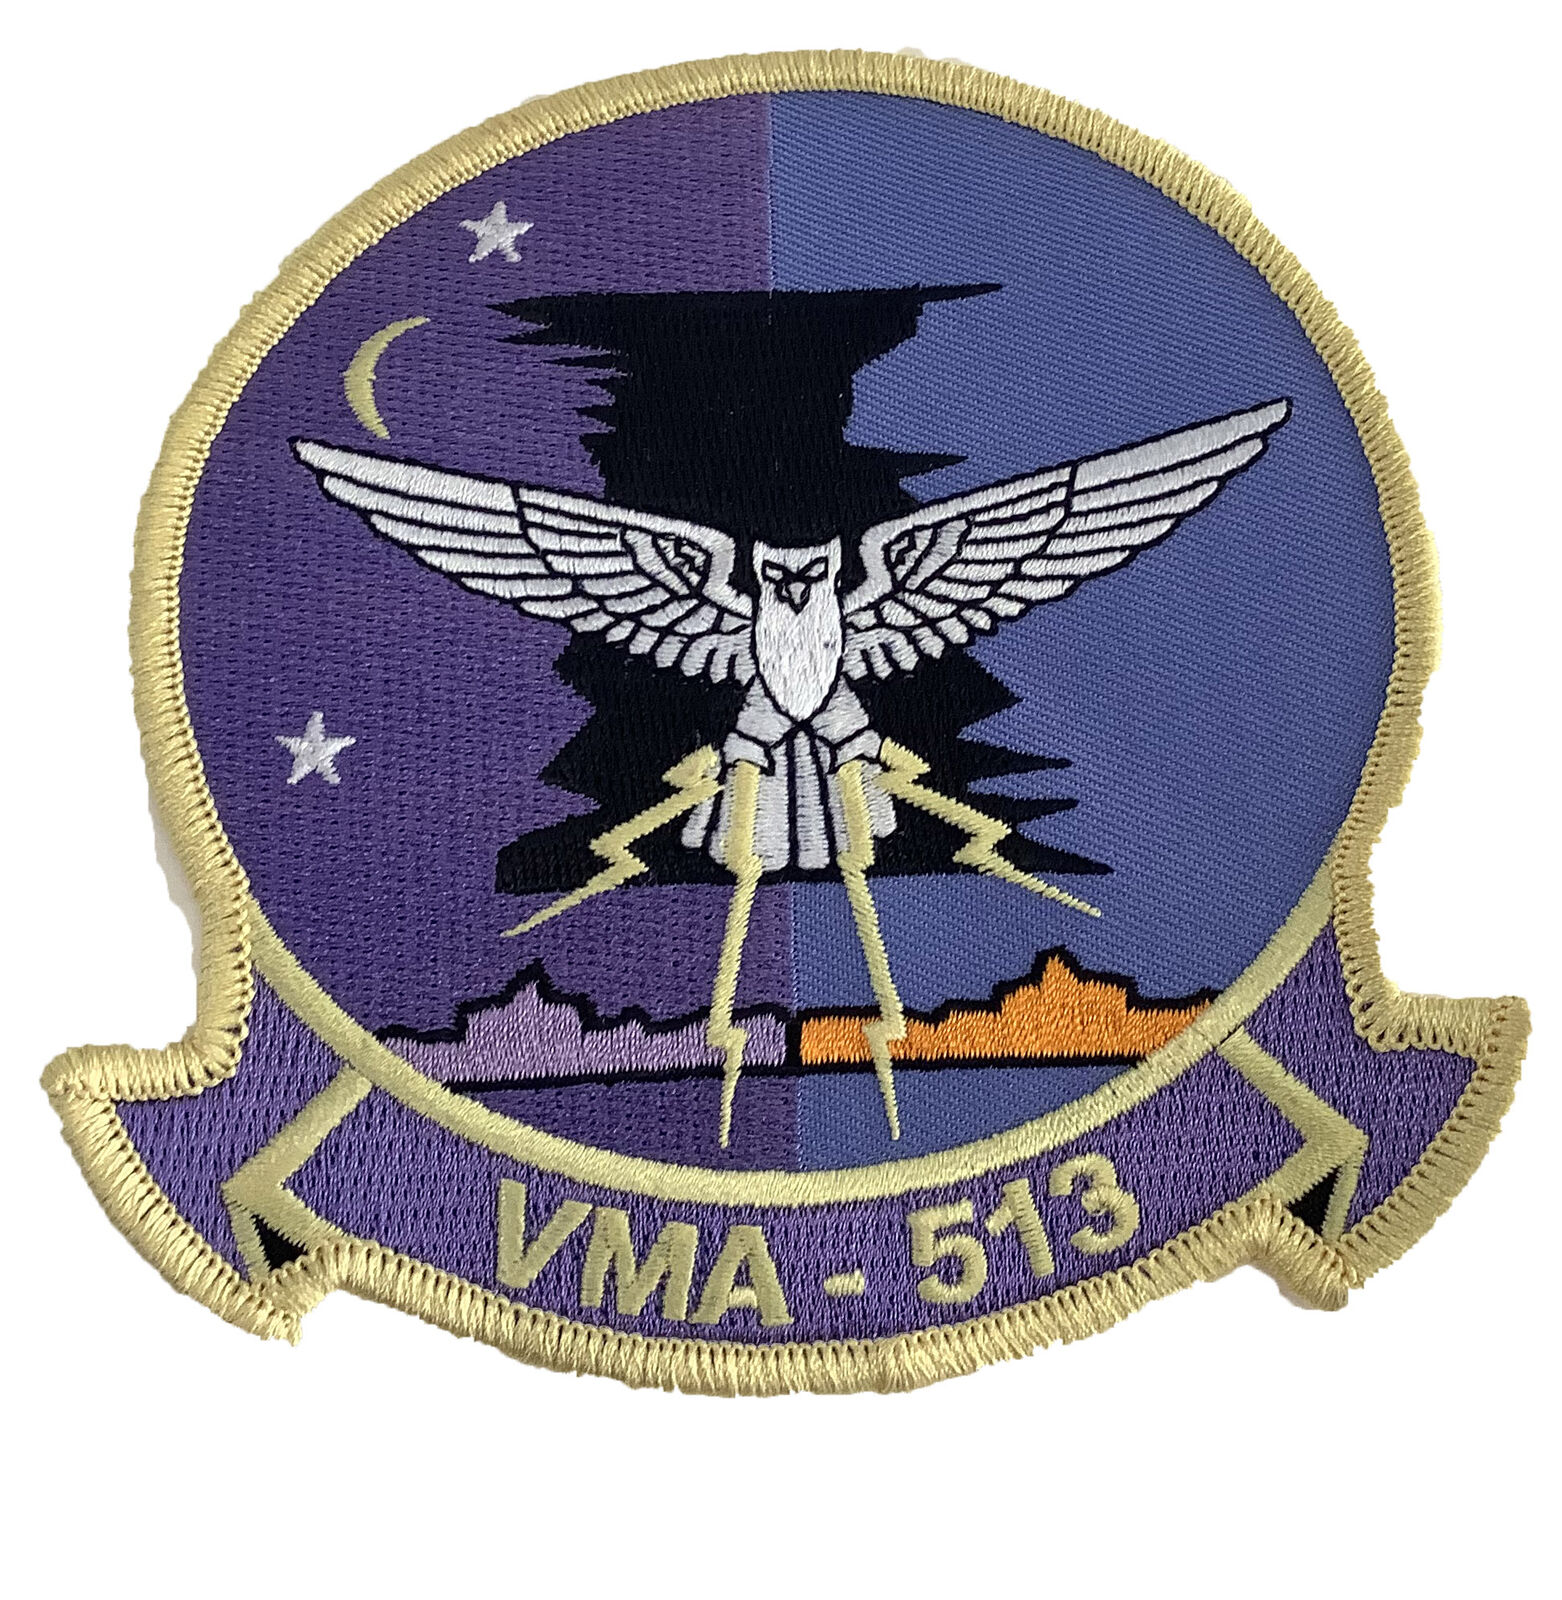 VMA-513 Flying Nightmares Patch – Sew On, 4.5